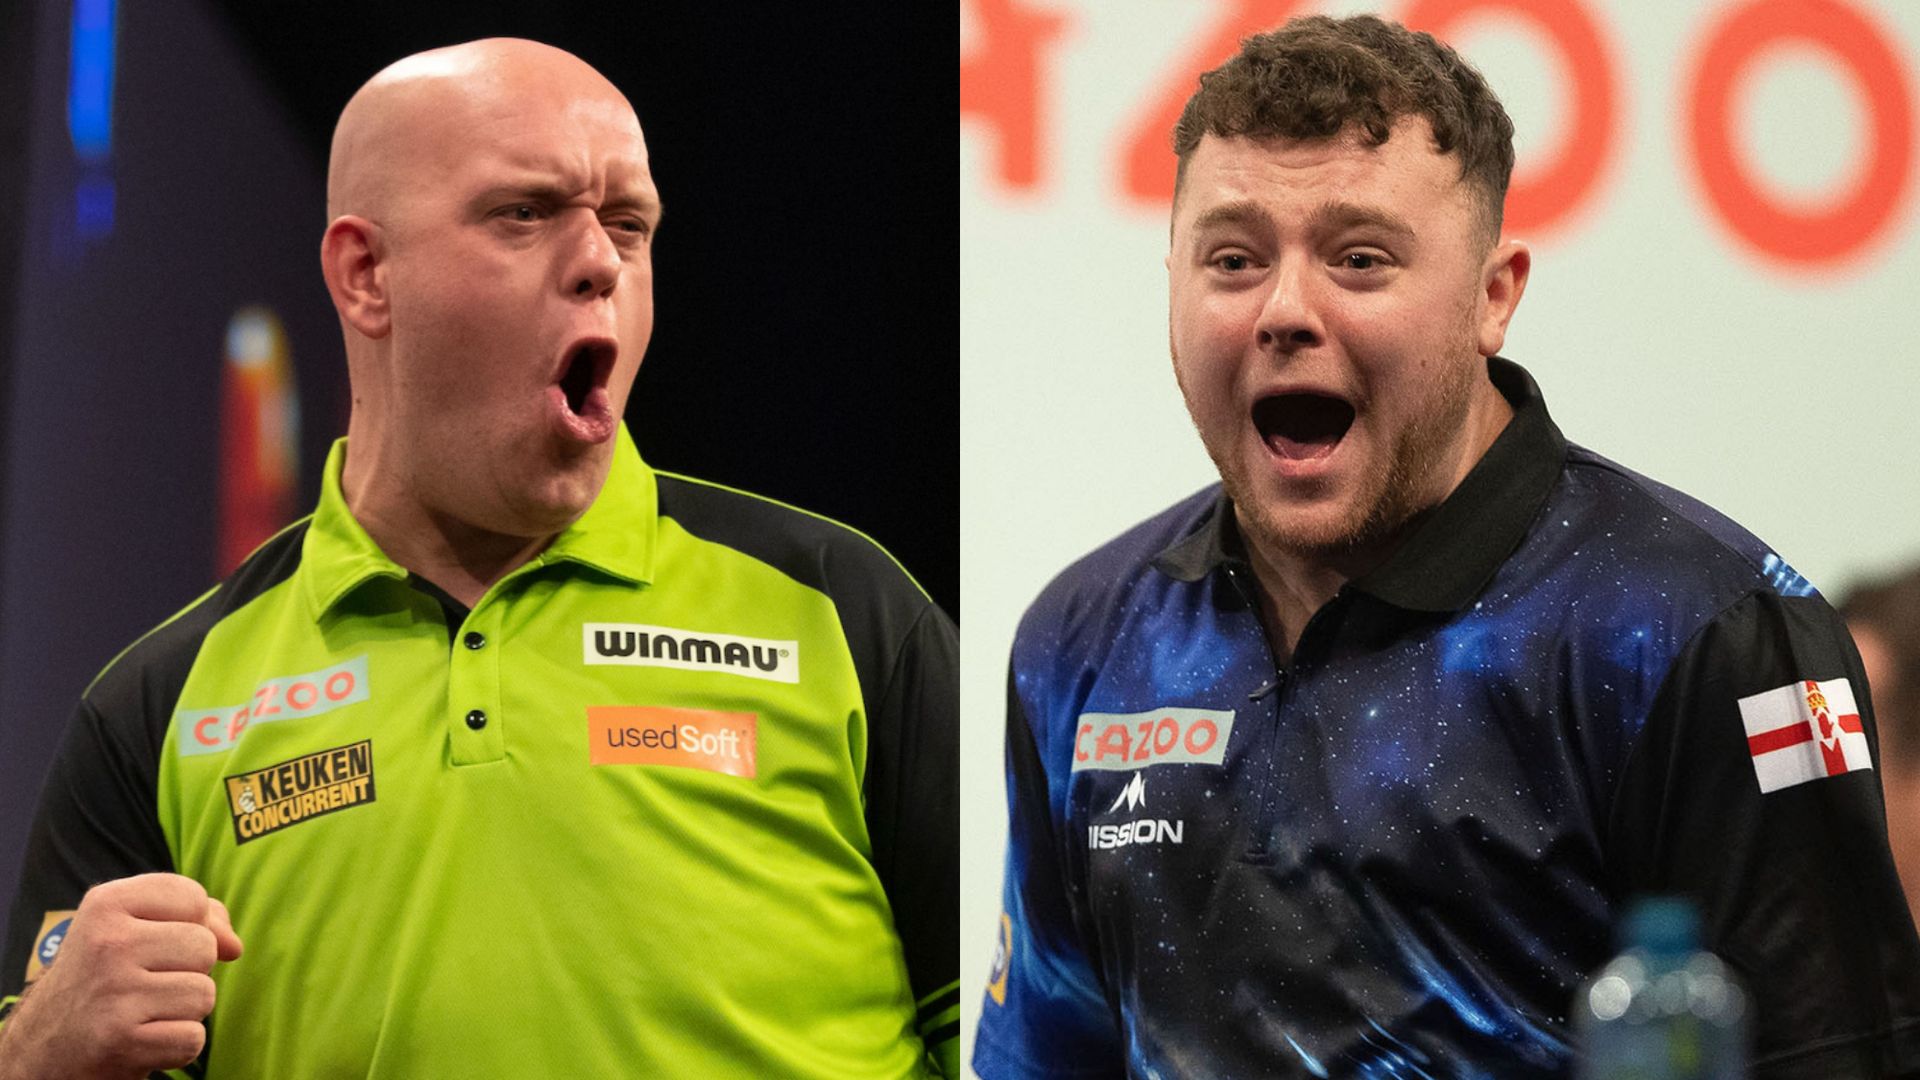 Grand Slam of Darts recap: MVG wins battle against new star Rock as Clayton knocked out